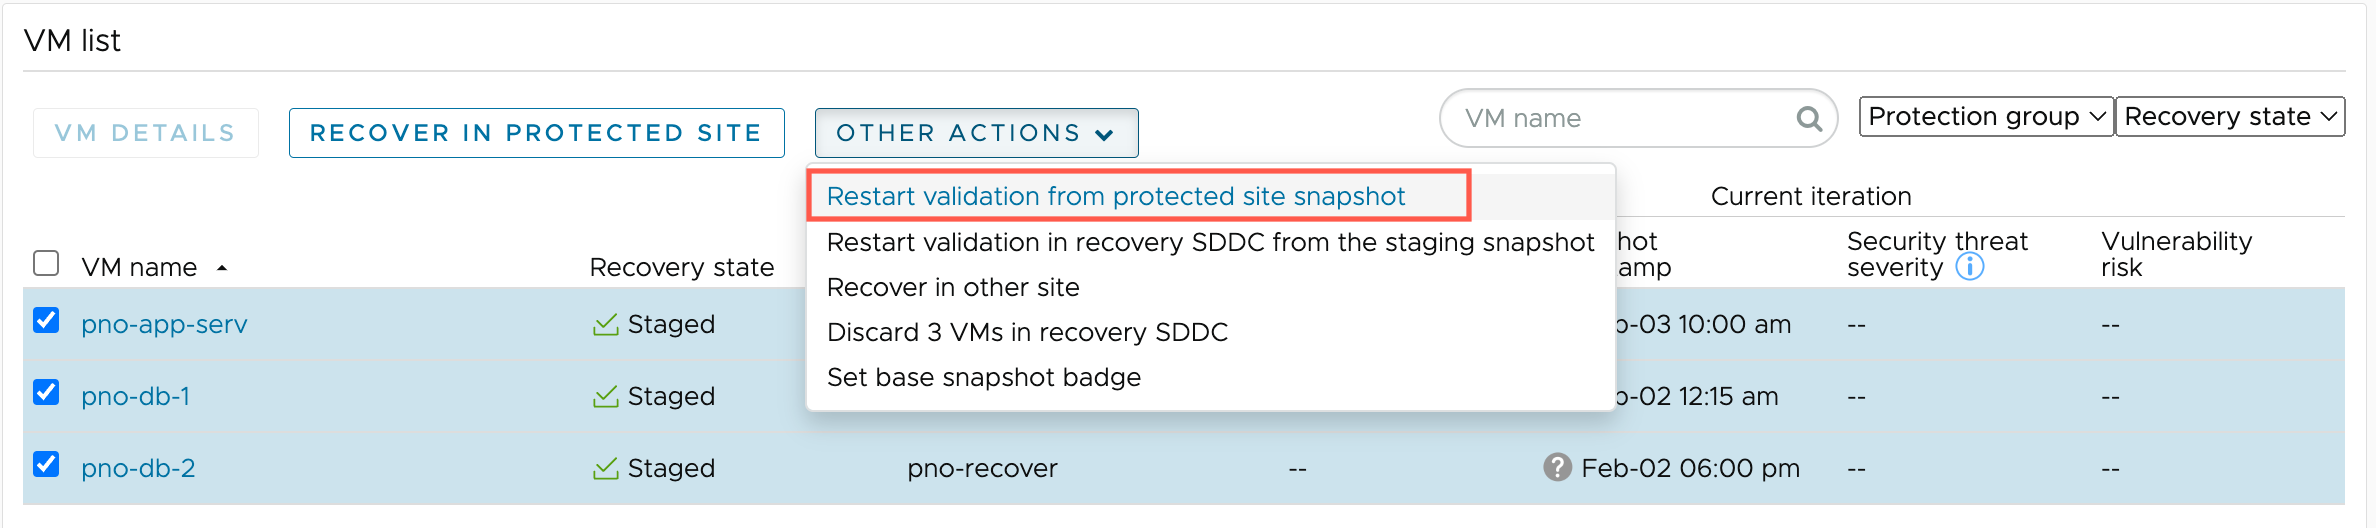 Restart validation from protected site snapshot operation